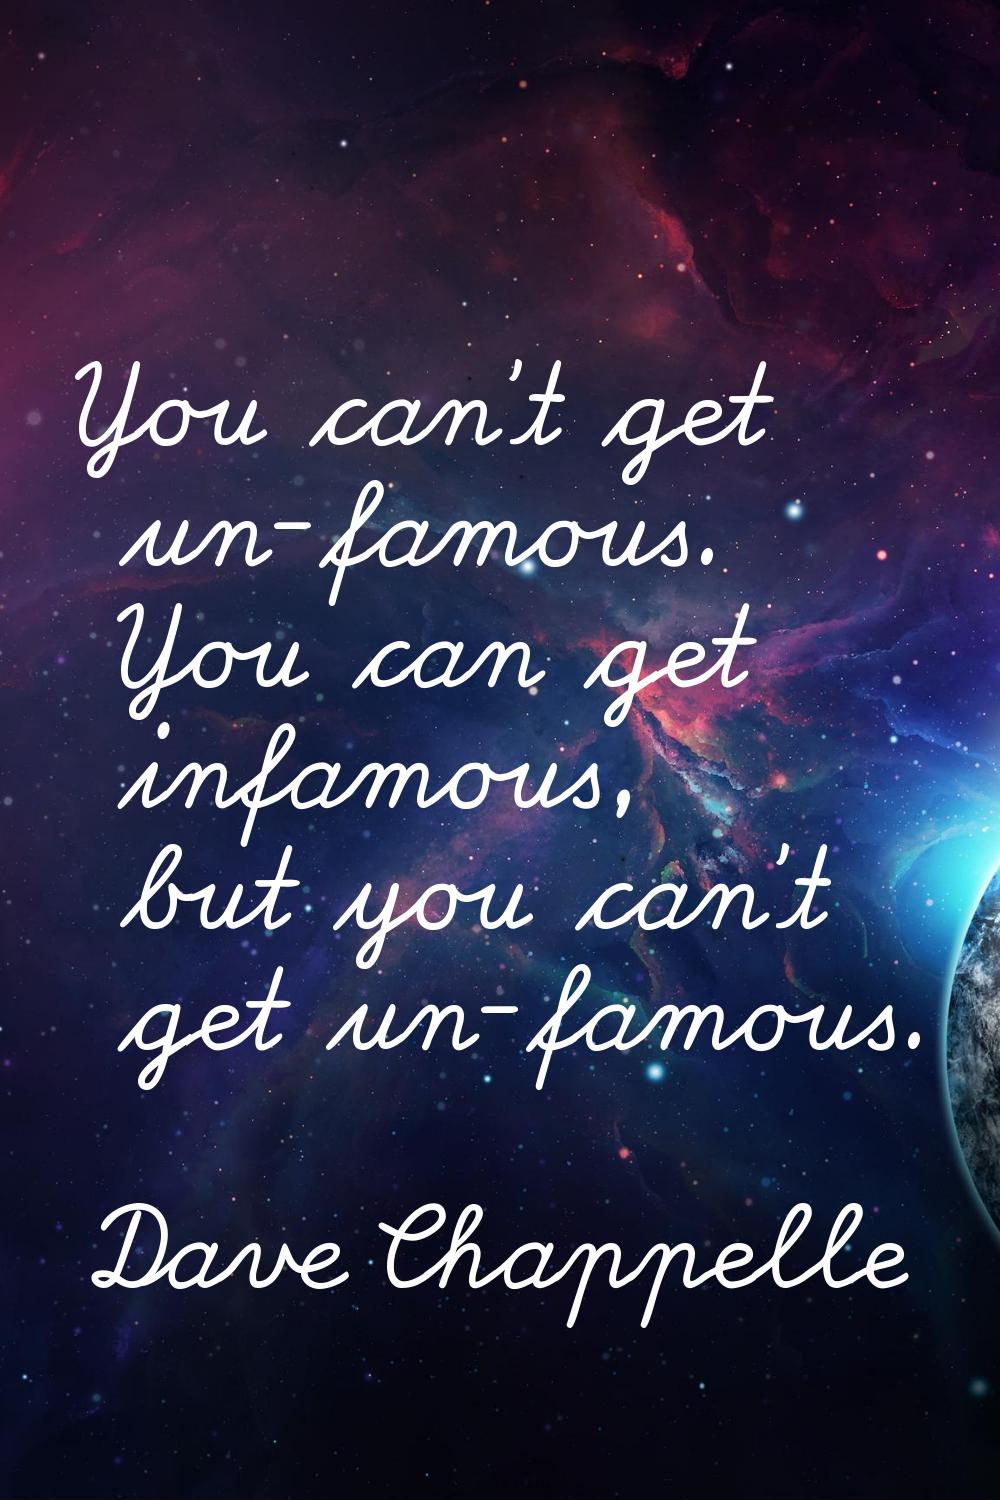 You can't get un-famous. You can get infamous, but you can't get un-famous.